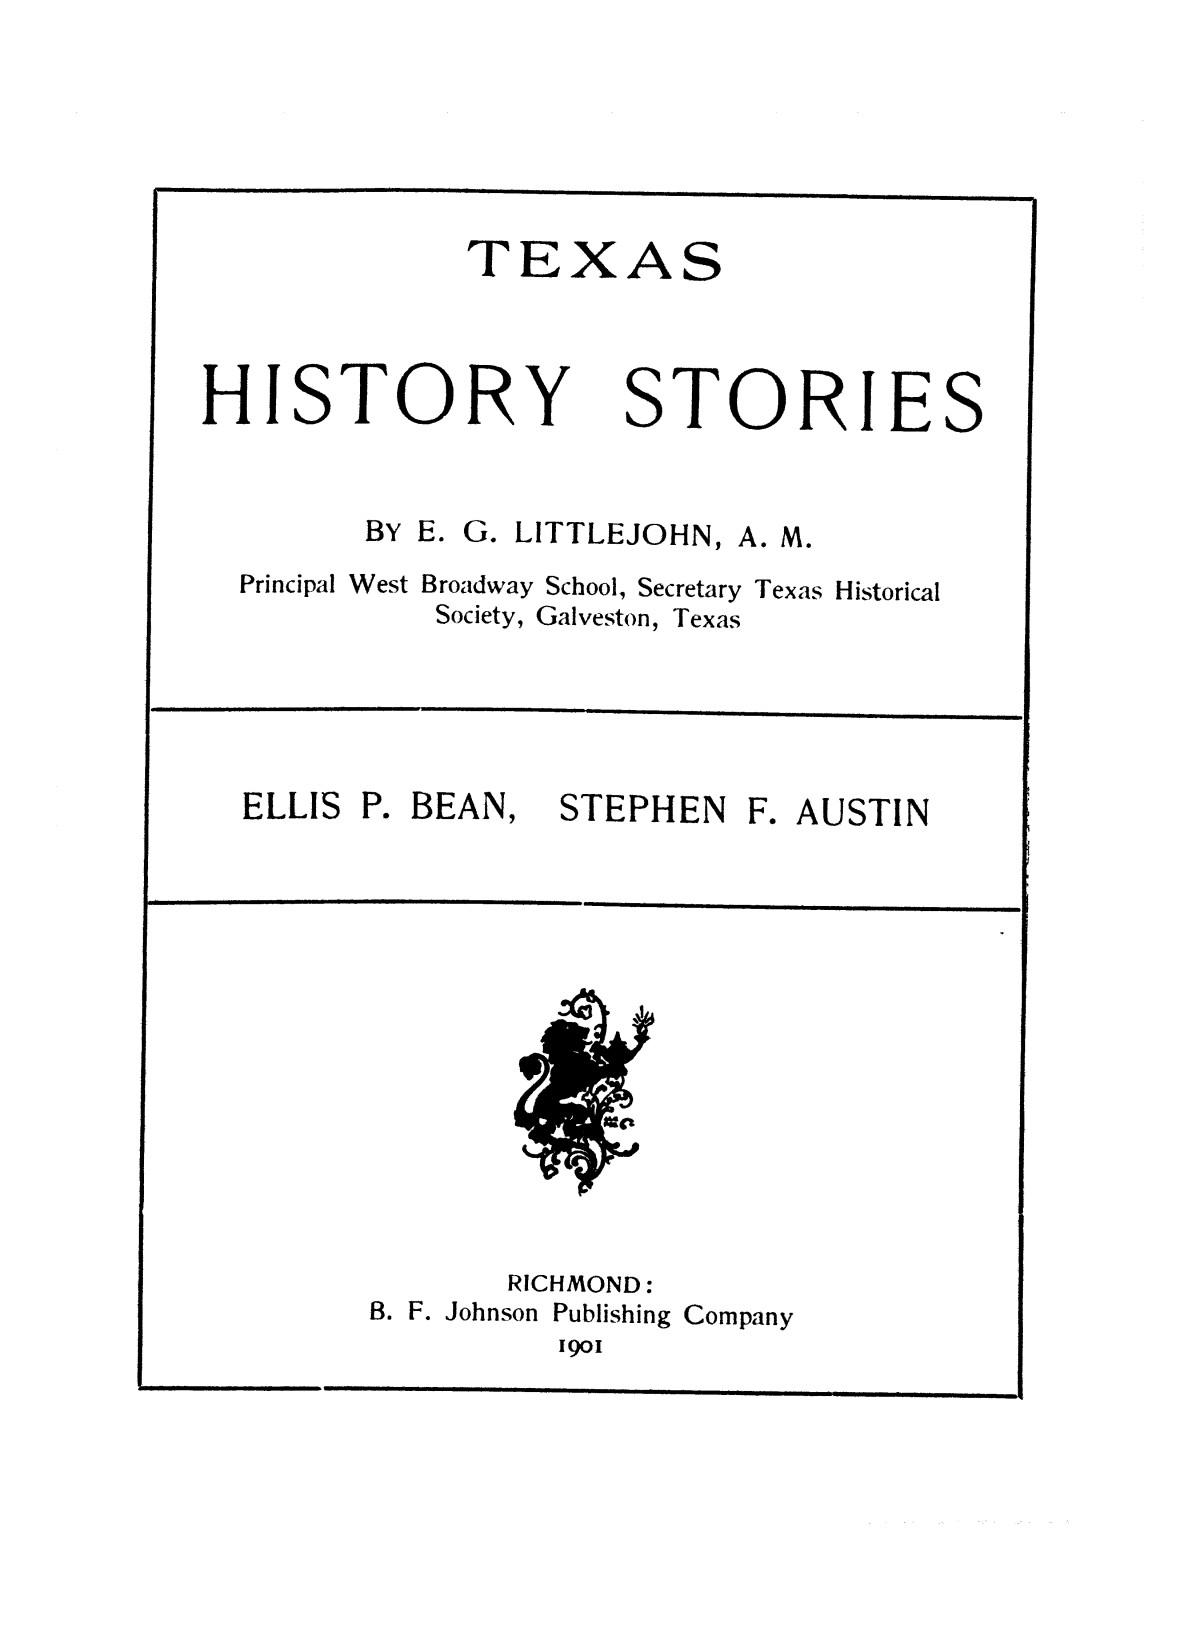 Texas History Stories: Ellis P. Bean and Stephen F. Austin.
                                                
                                                    [Sequence #]: 3 of 51
                                                